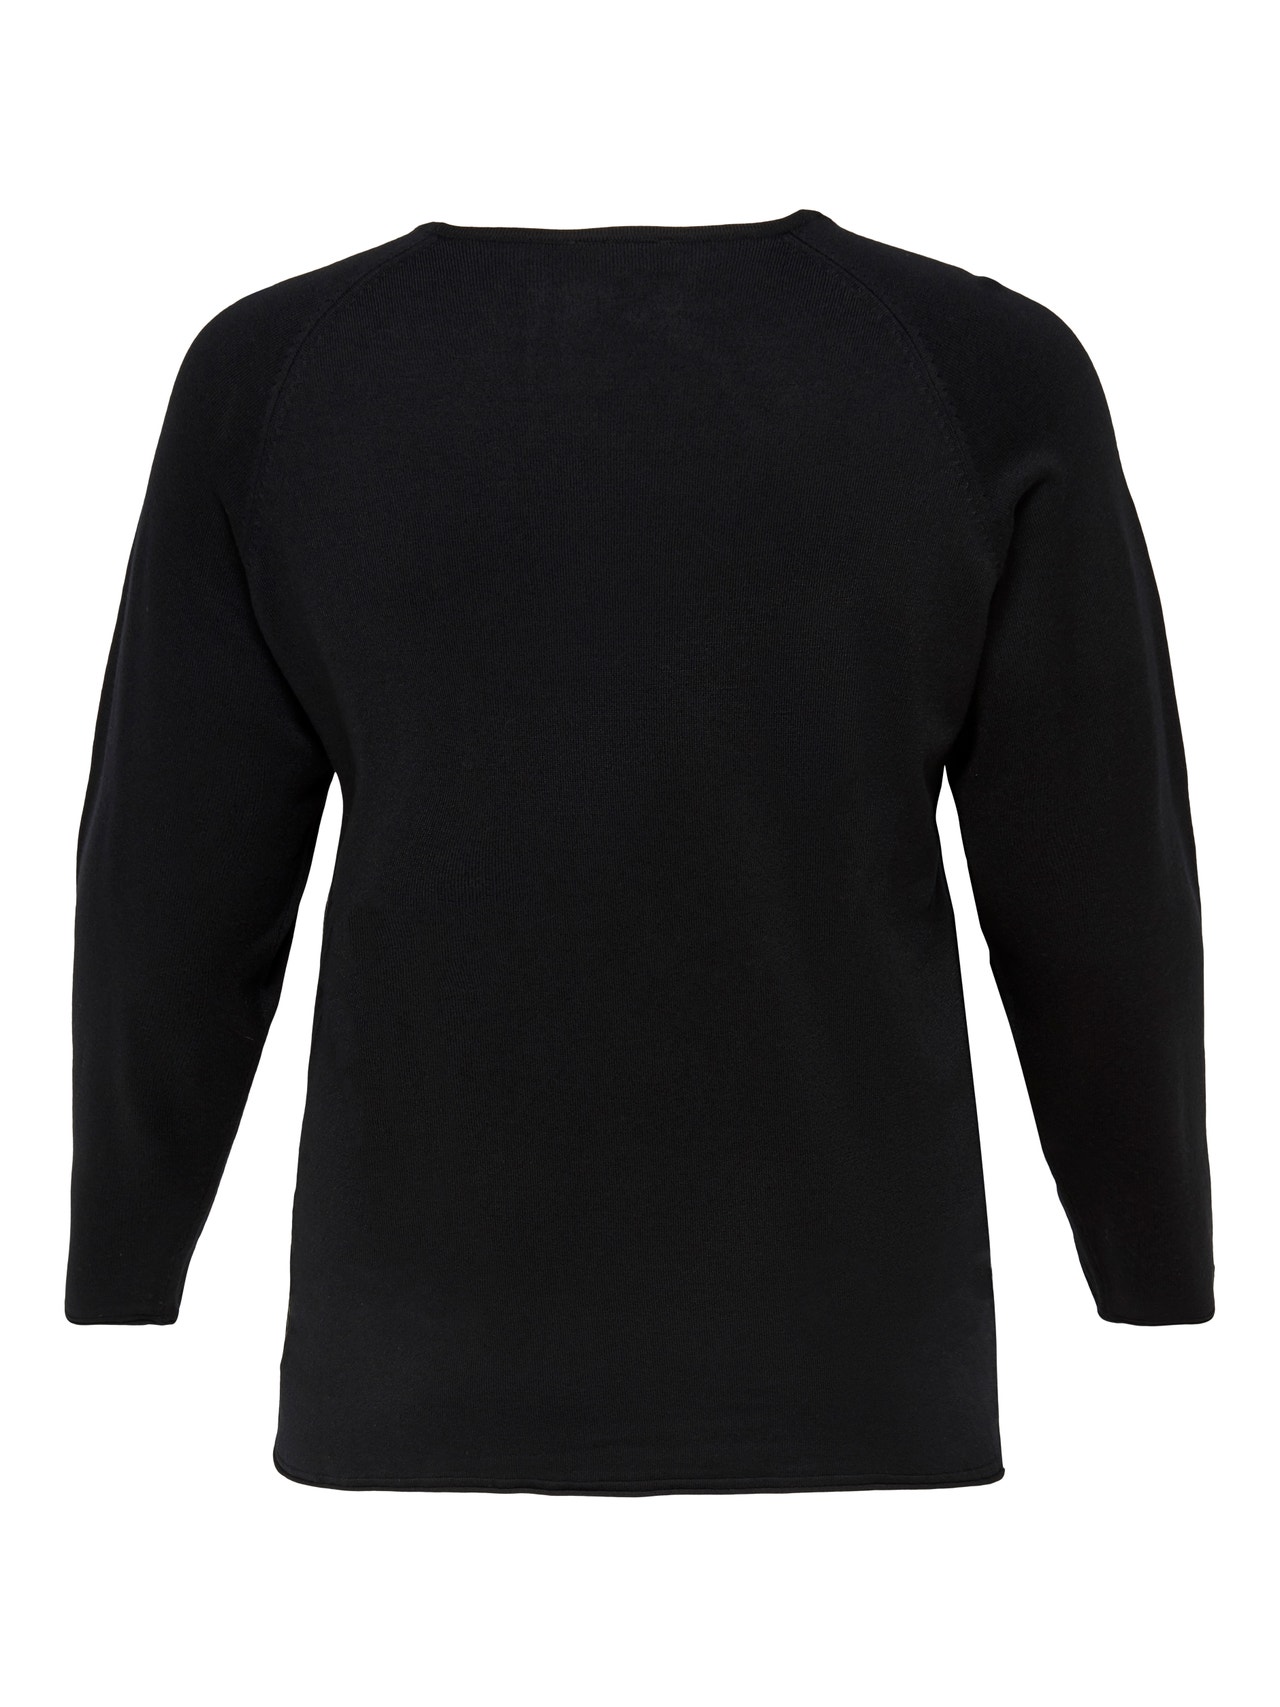 ONLY Round Neck Curve Rolled edge cuffs Dropped shoulders Pullover -Black - 15197209